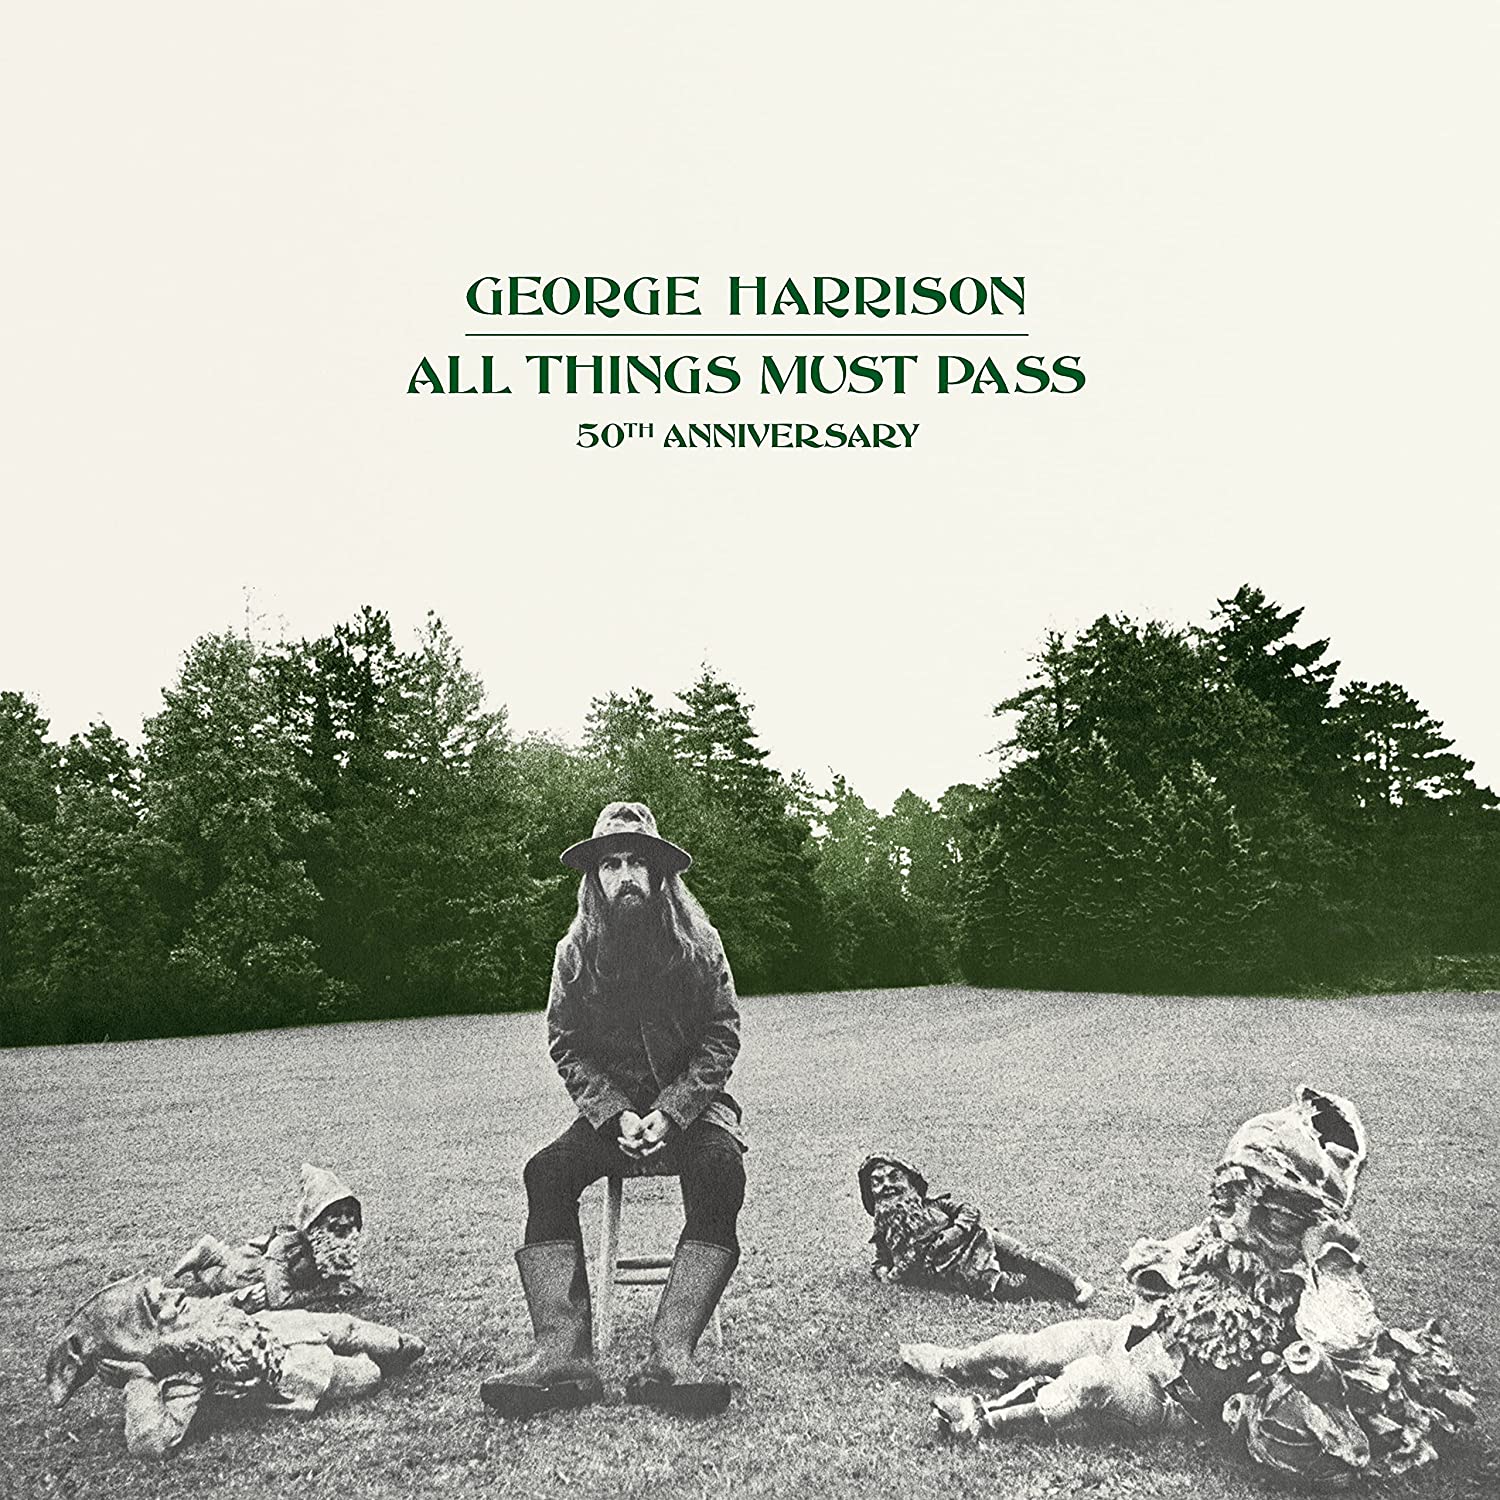 GEORGE HARRISON - ALL THINGS MUST PASS (DLX 5LP)